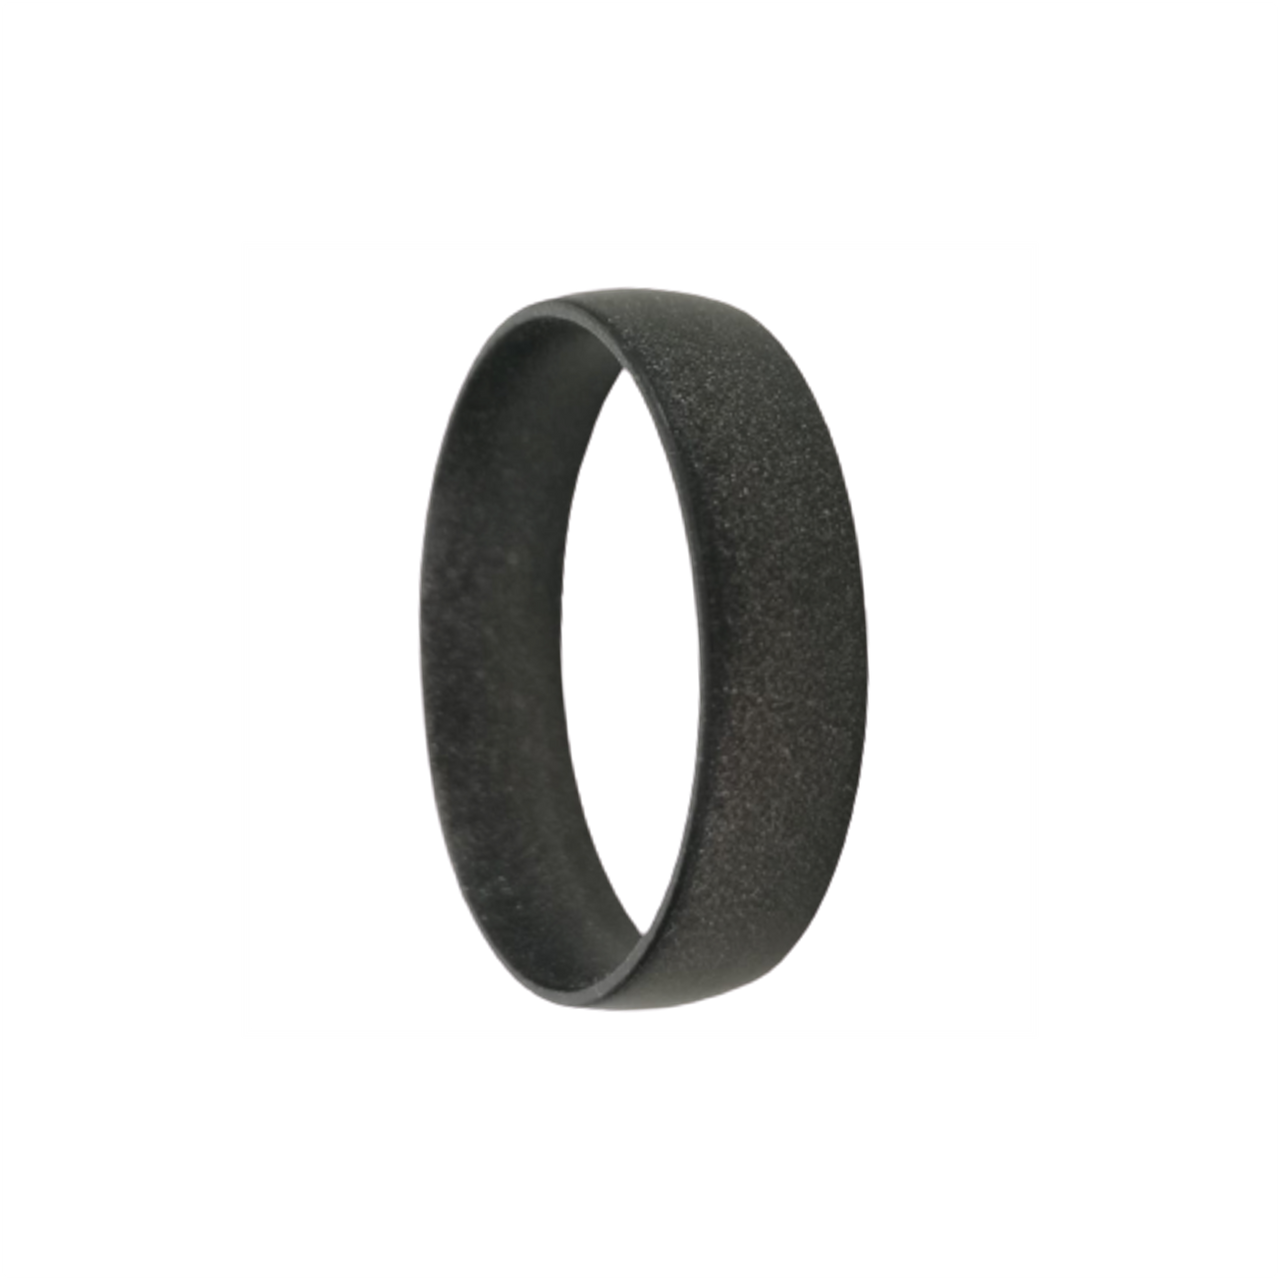 Ultralight Silicone Ring